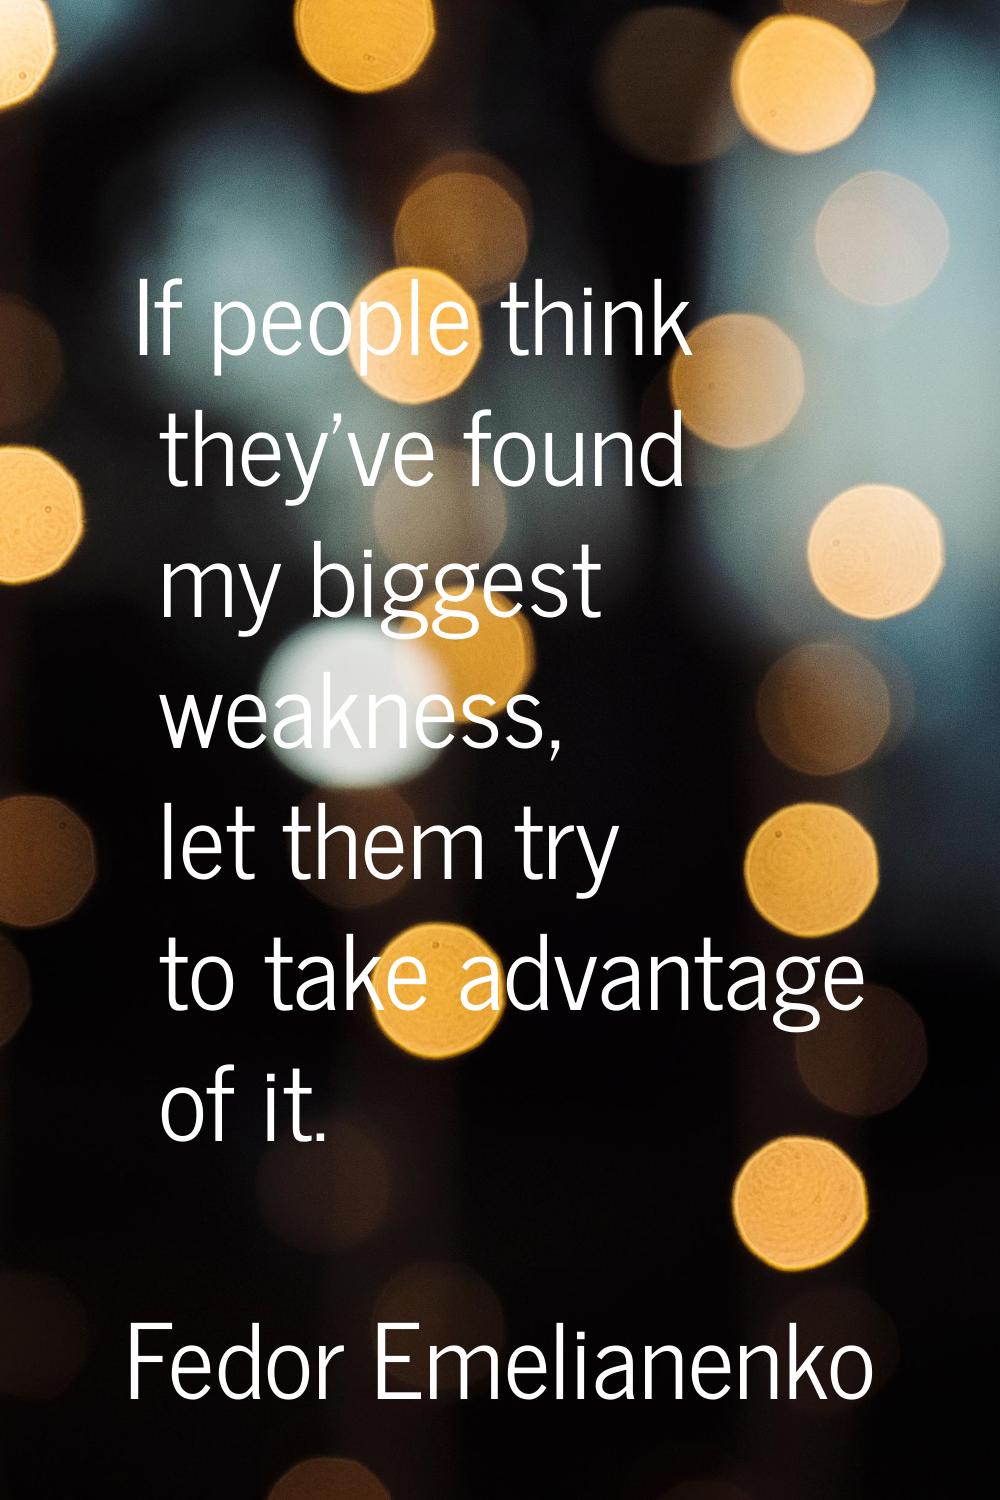 If people think they've found my biggest weakness, let them try to take advantage of it.